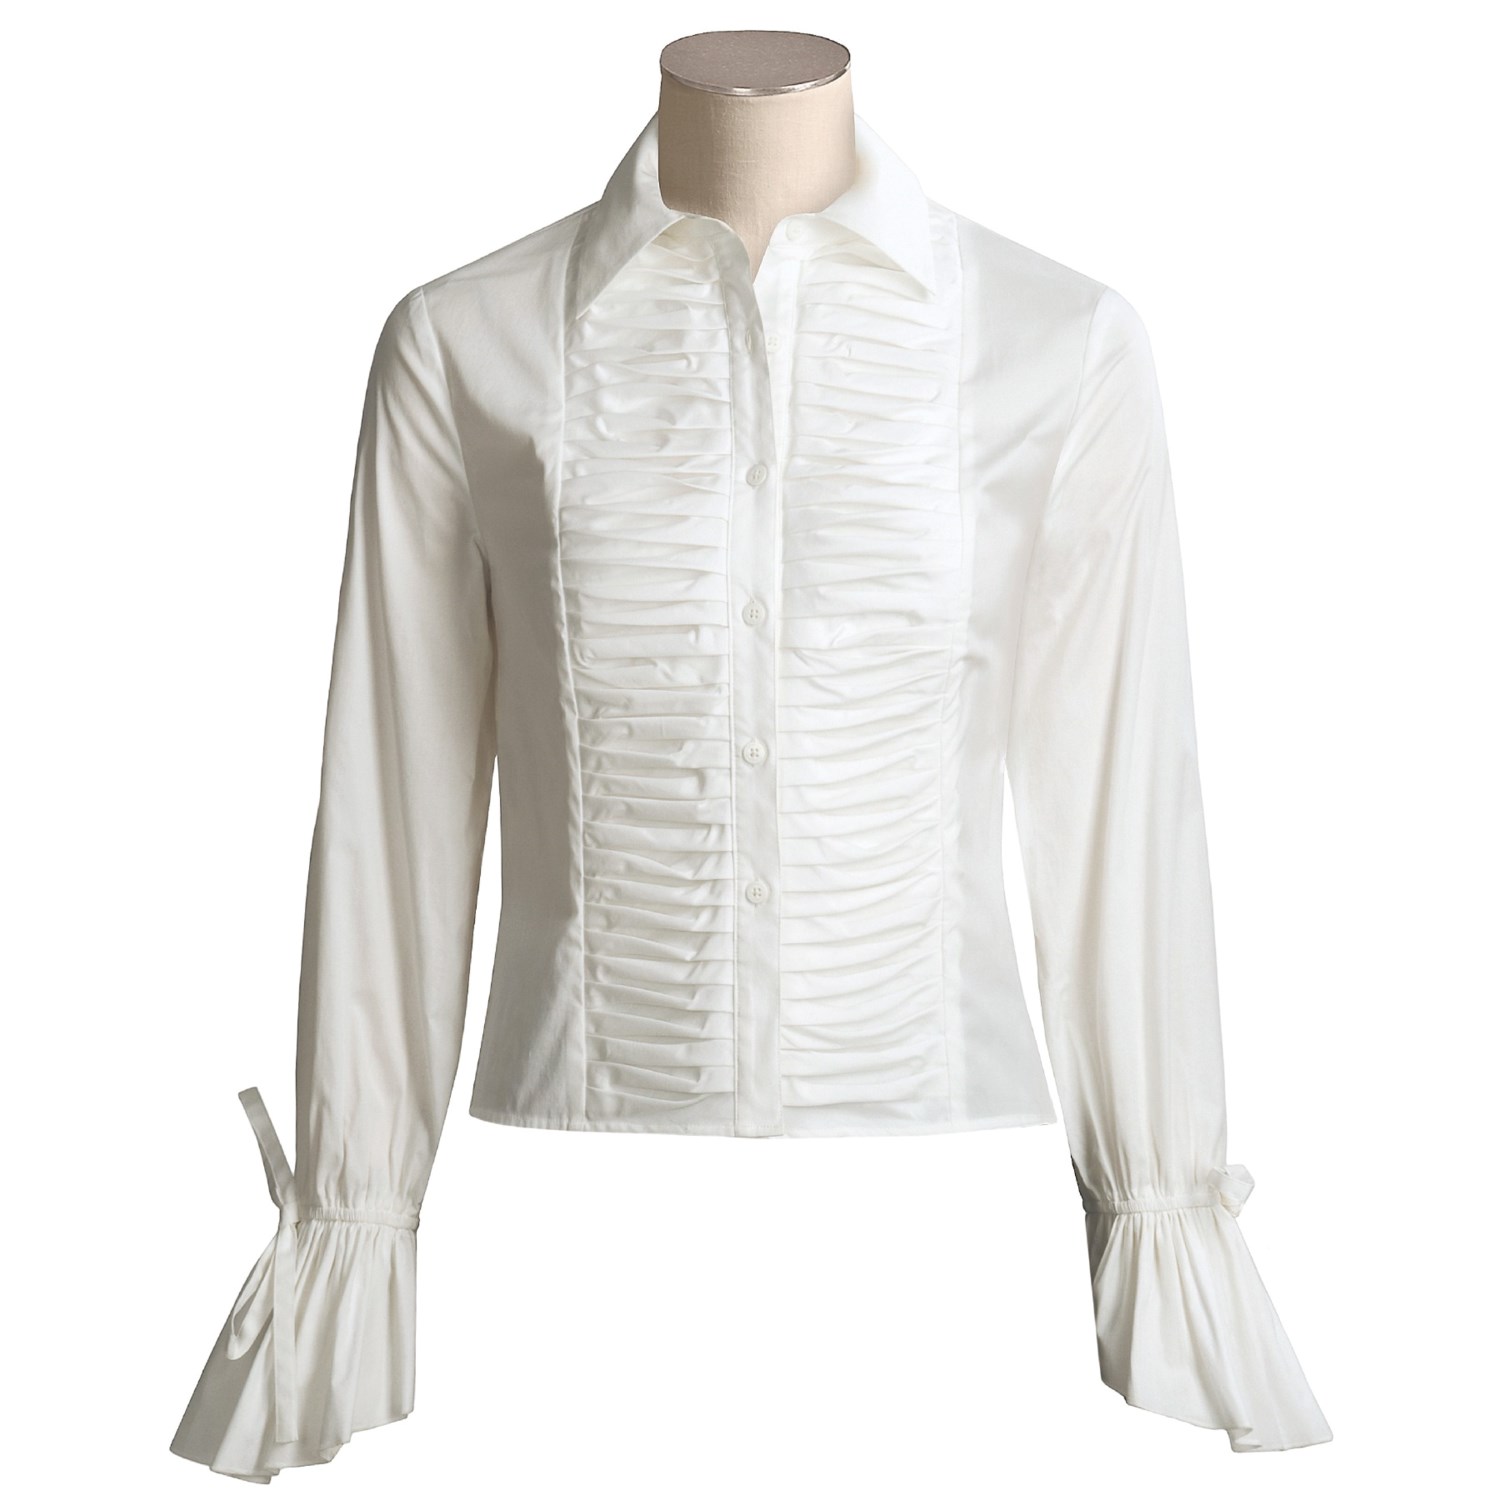 Emanuel Pleated Poet Shirt (For Women) 1608M - Save 60%